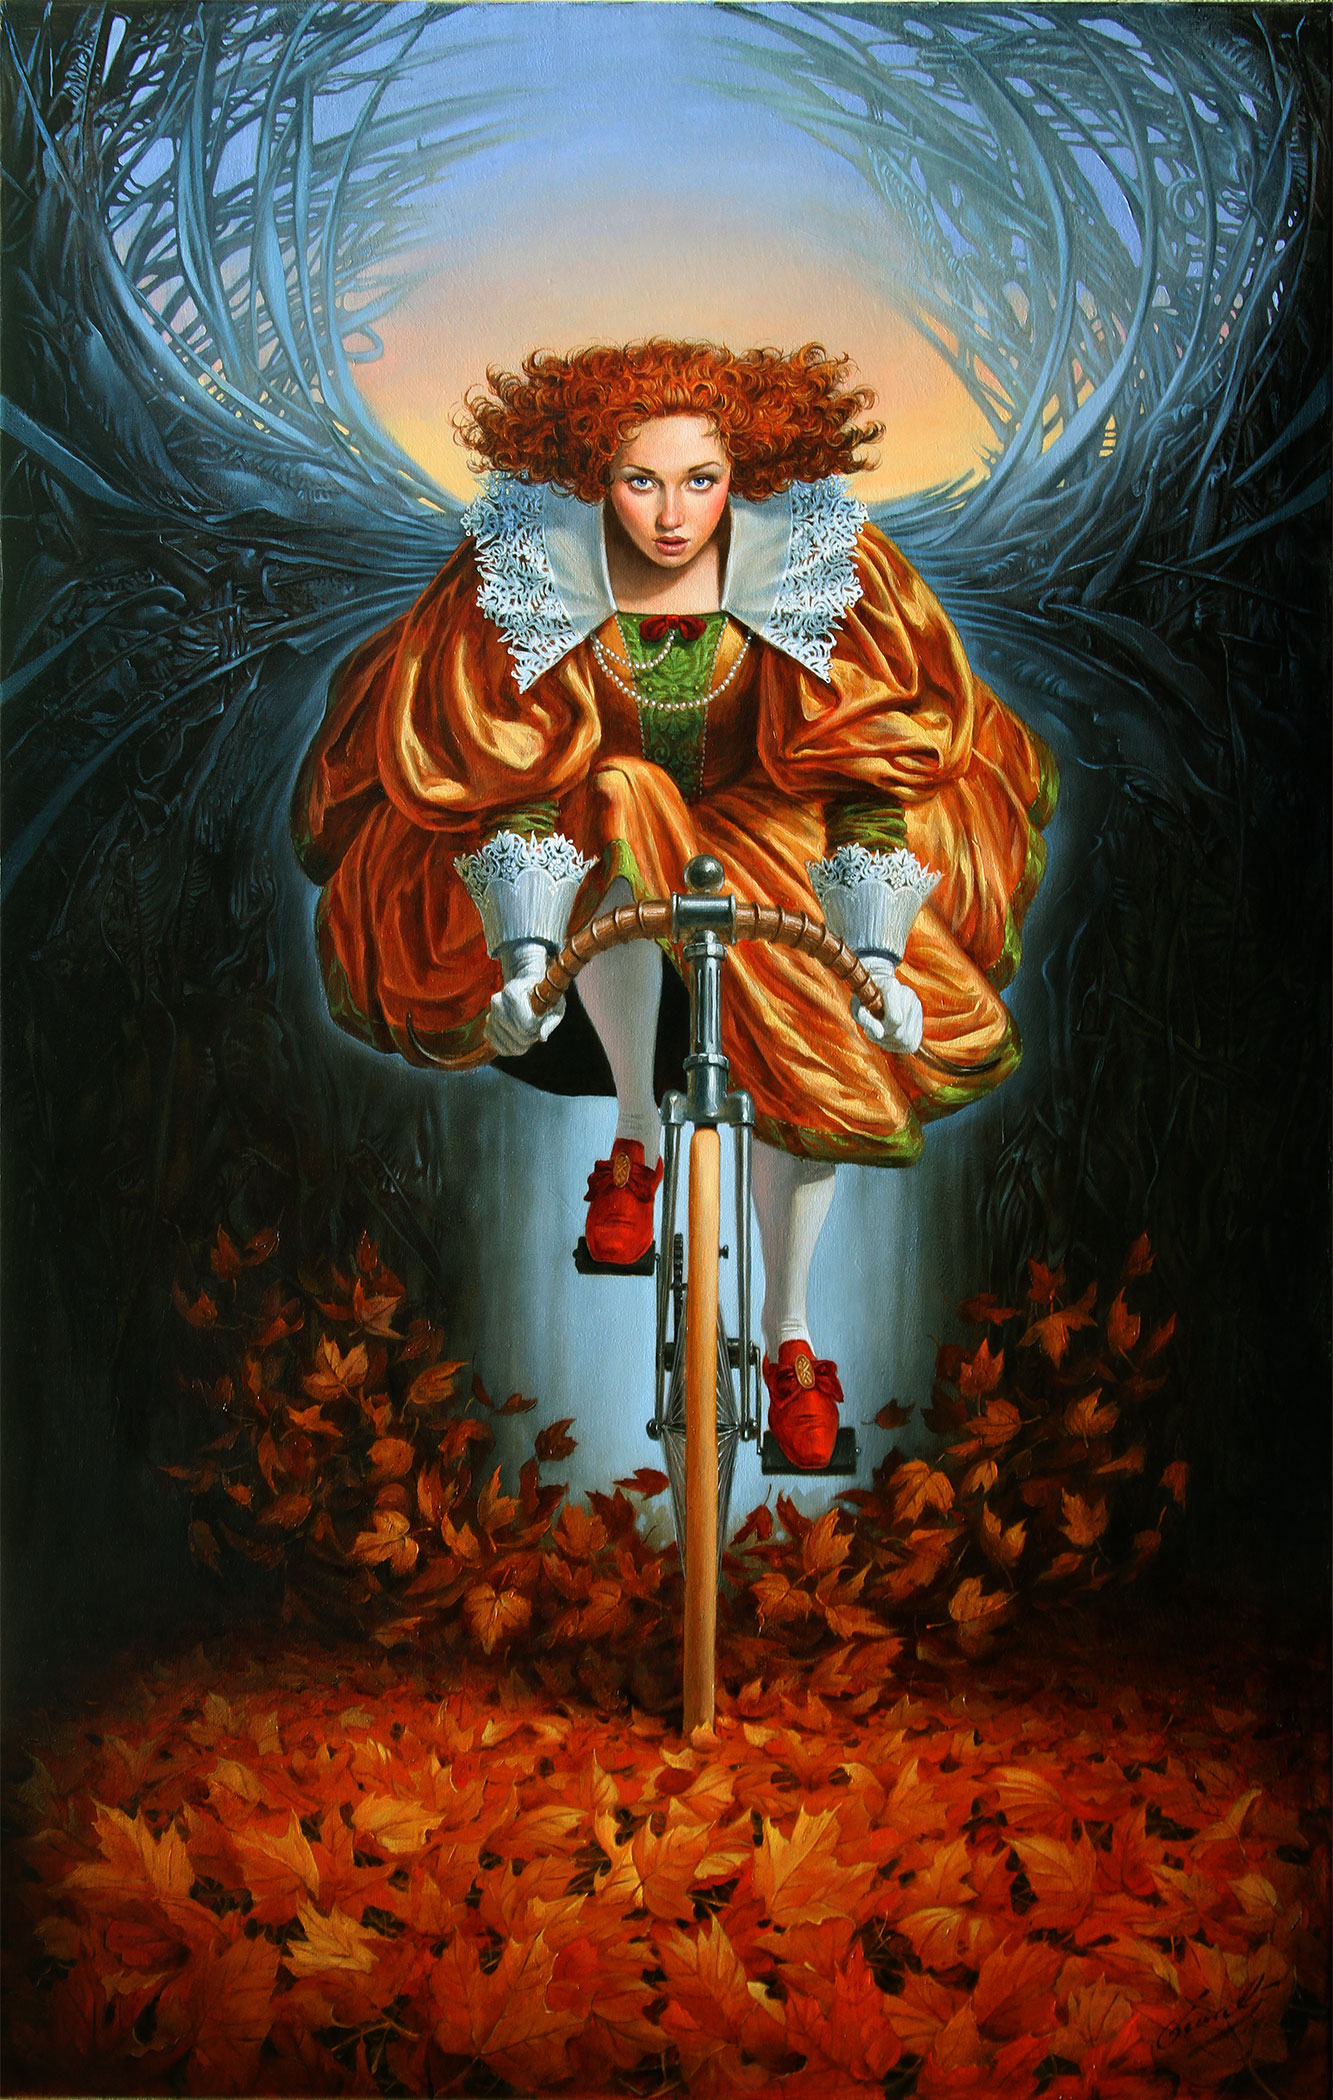 Michael Cheval - ON THE WINGS OF FALL - Oil on Canvas